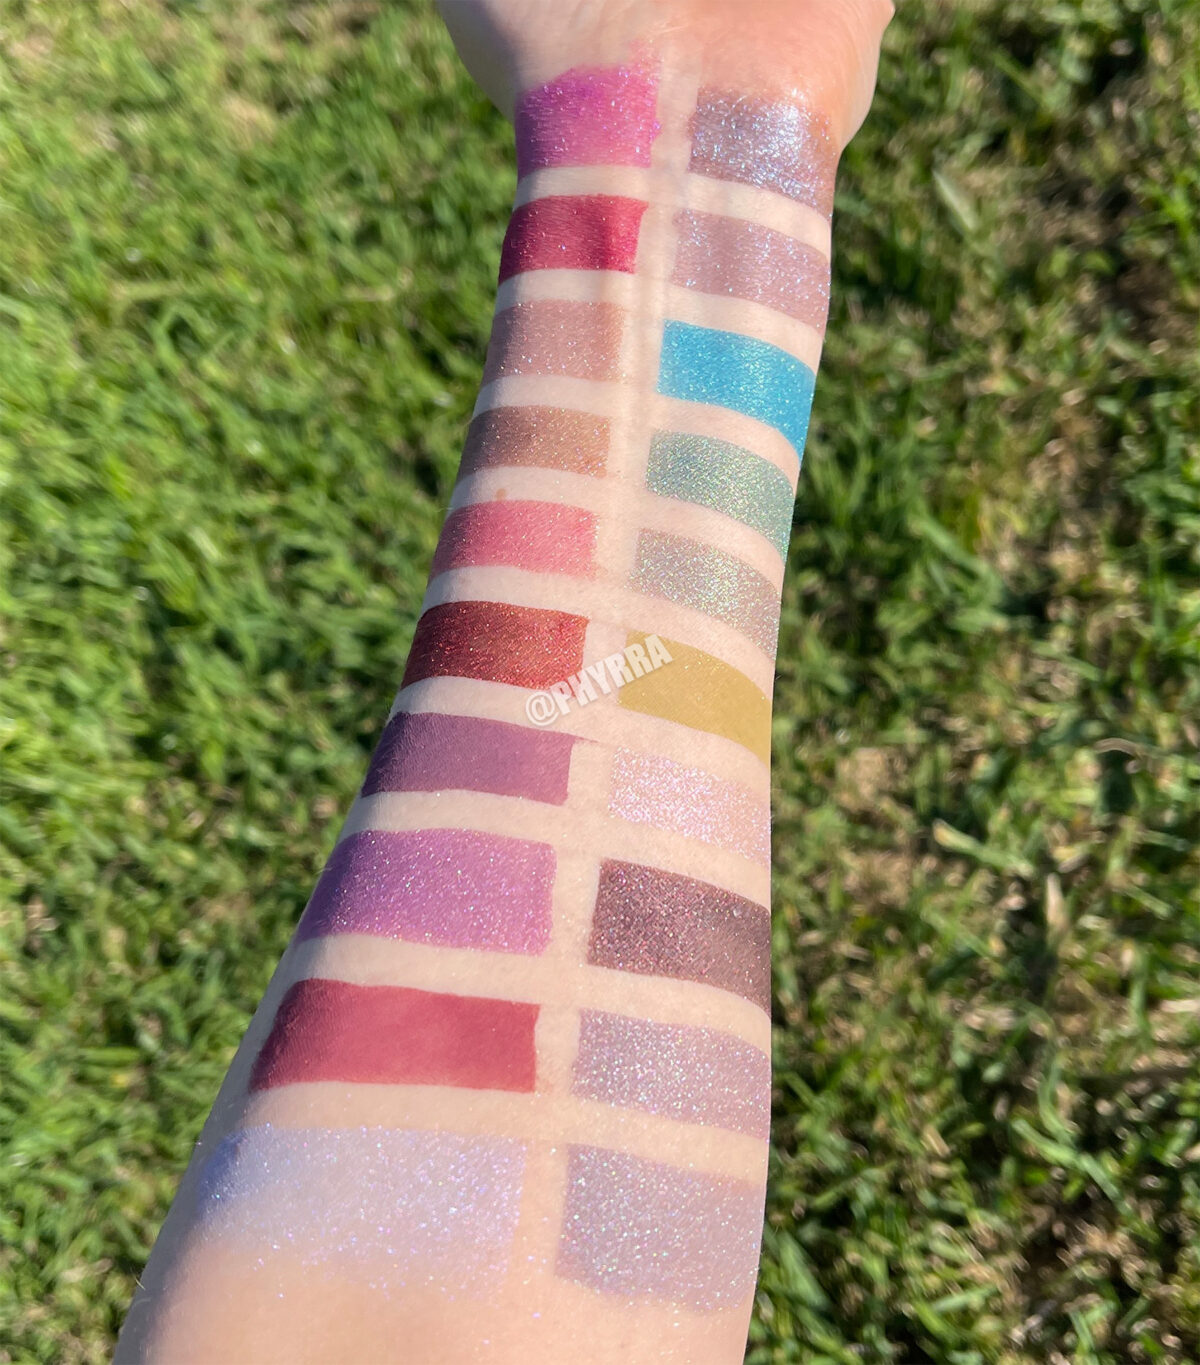 Swatched on Light Skin, Aromaleigh Eyeshadow Swatches